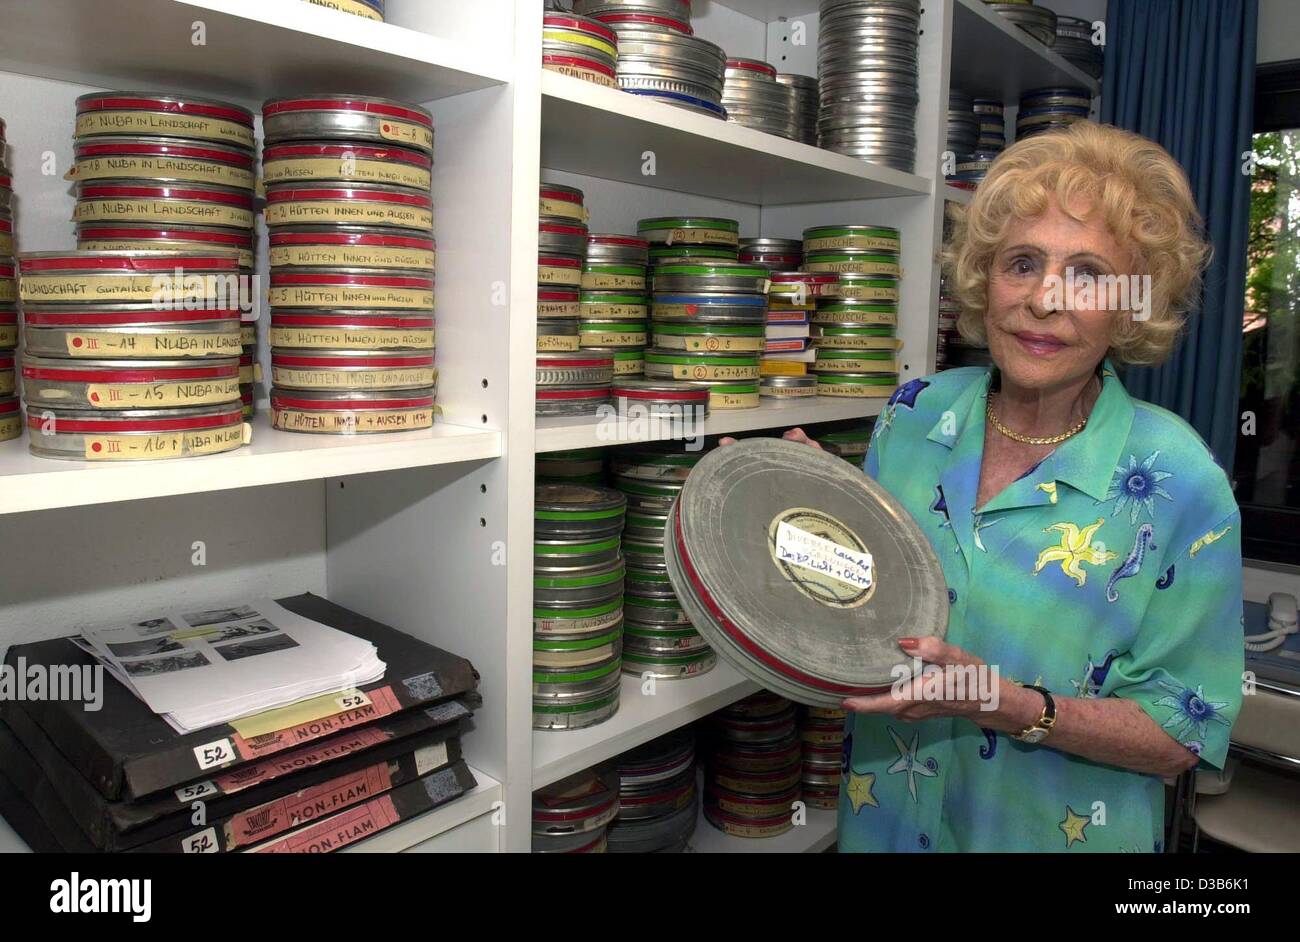 (dpa) - German filmmaker Leni Riefenstahl shows her film archive in her house in Poecking, Germany, 13 August 2002. The outstanding but controversial director and photographer who worked for Hitler and documented a huge nazi rally in her film 'Triumph of the Will' as well as the 1936 Berlin Olympics Stock Photo